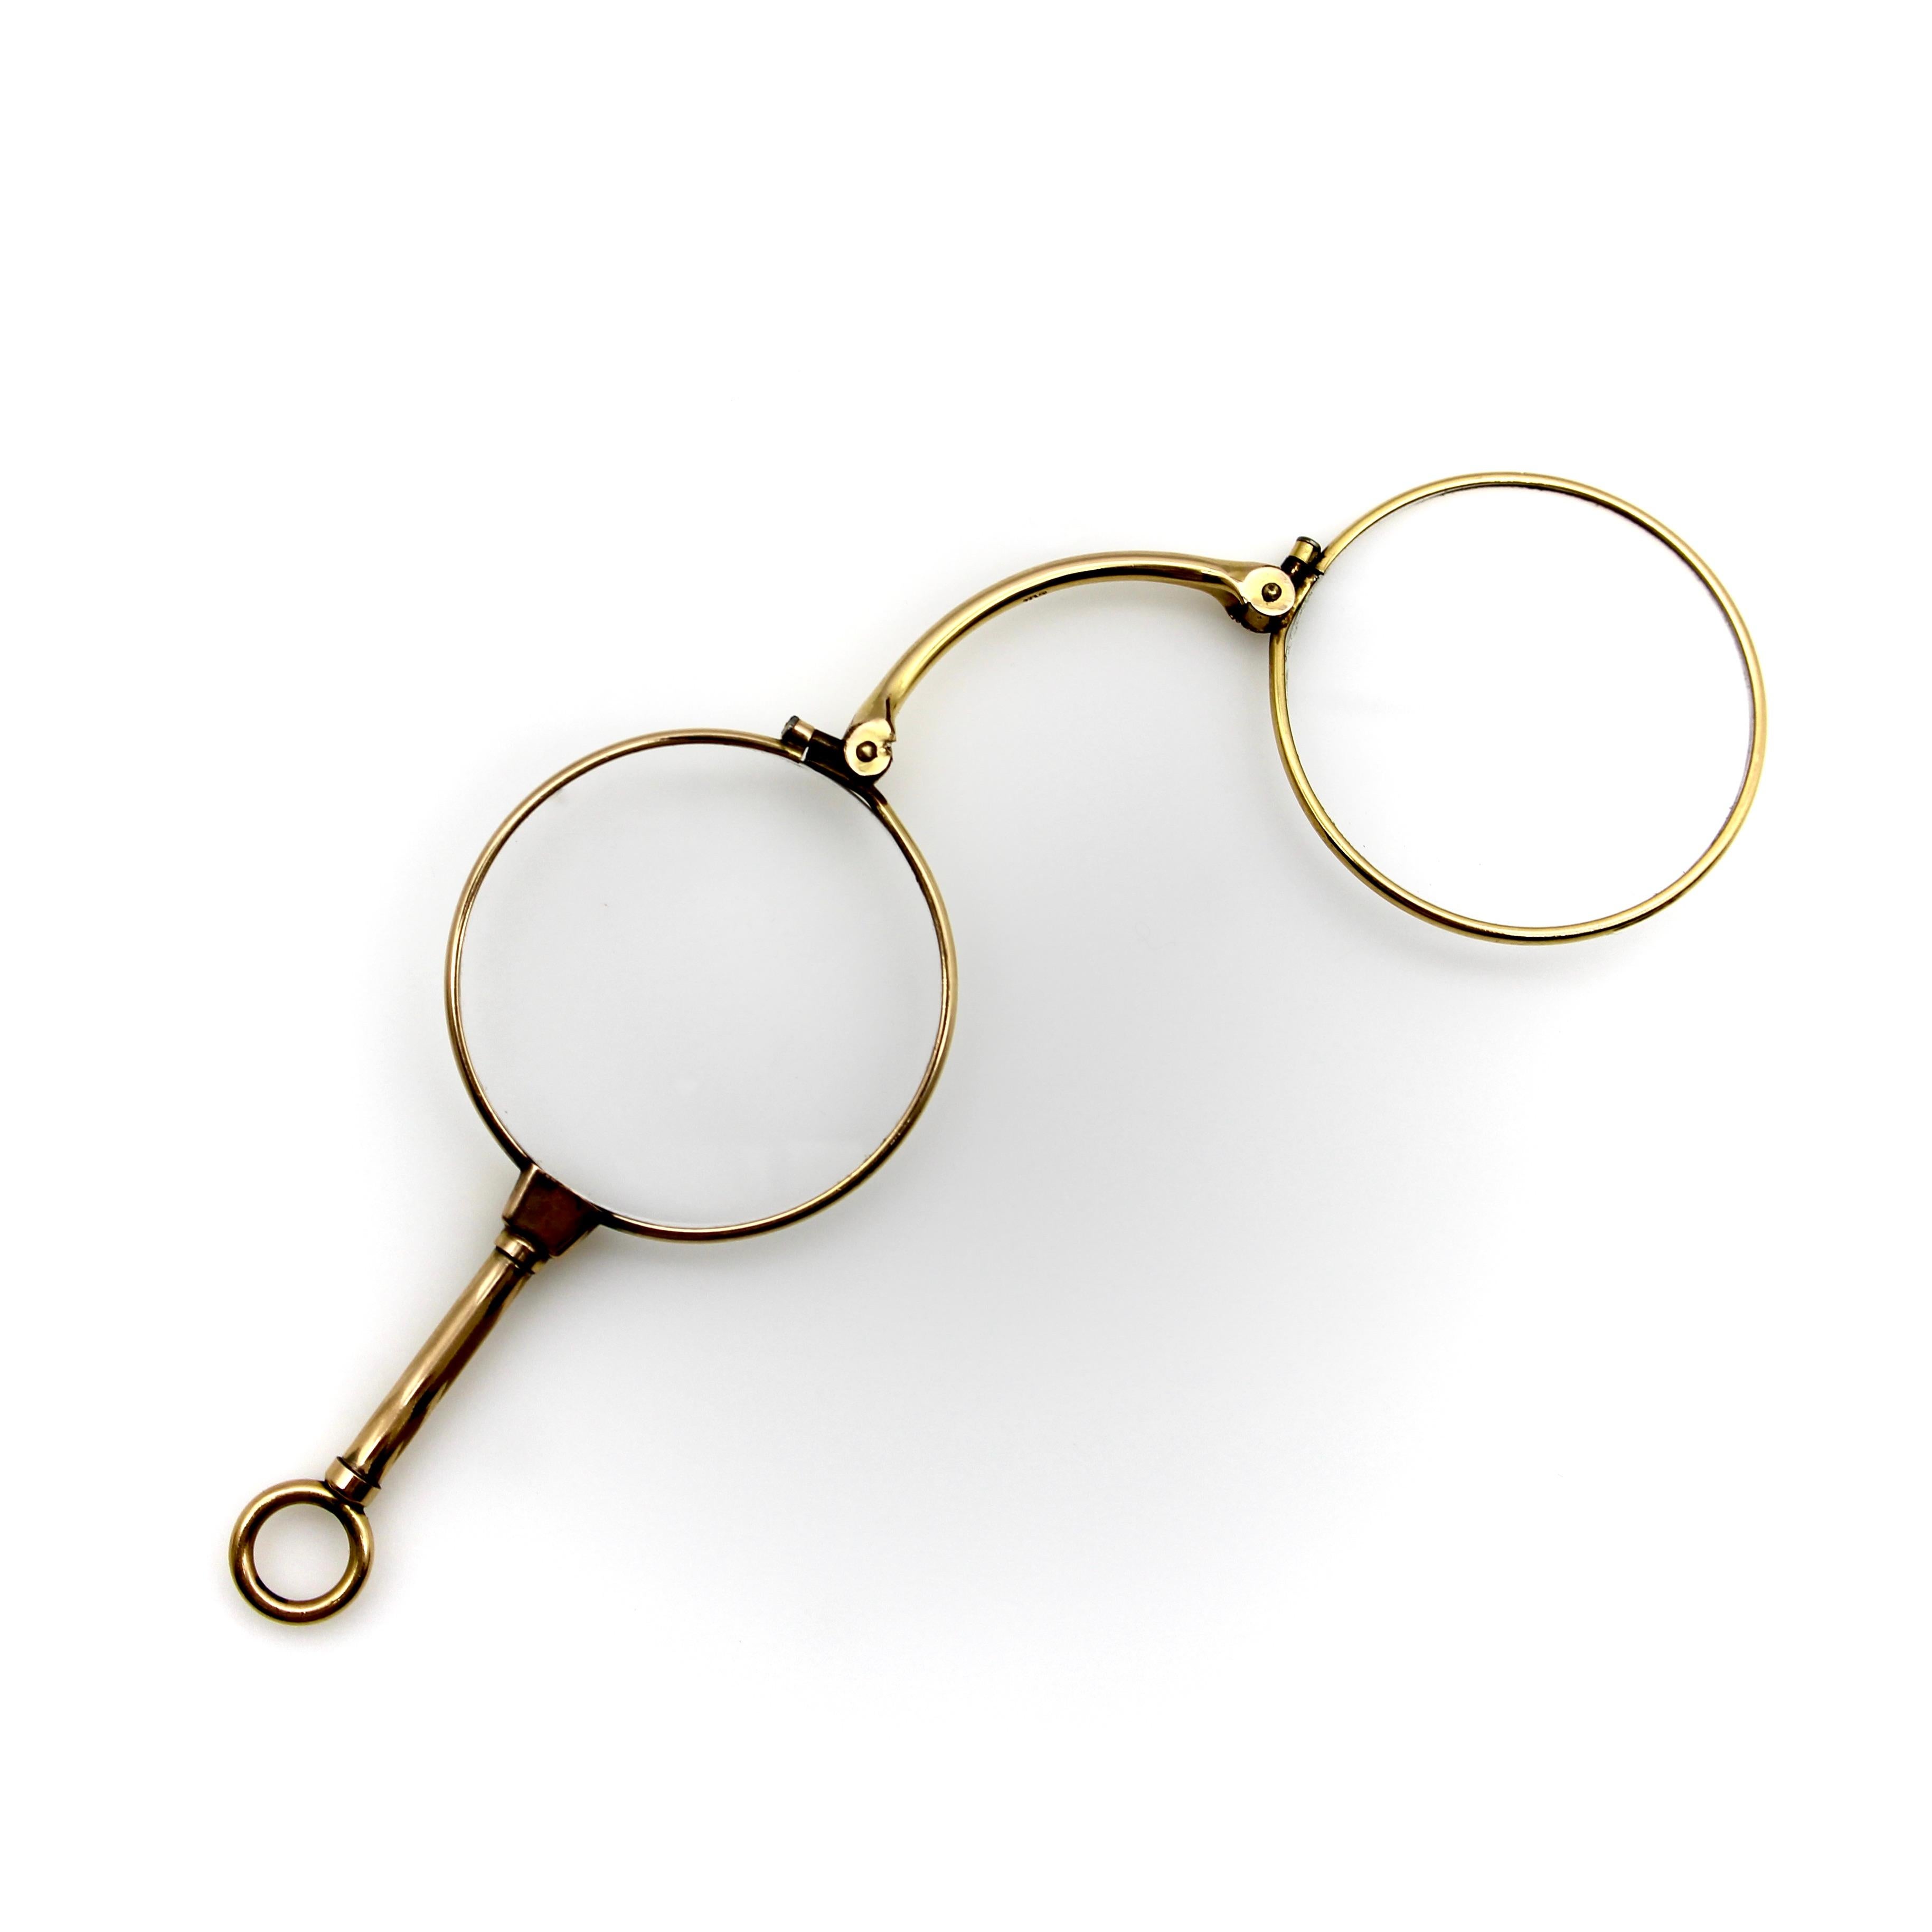 Edwardian 14k Gold Mechanical Lorgnette In Good Condition For Sale In Venice, CA